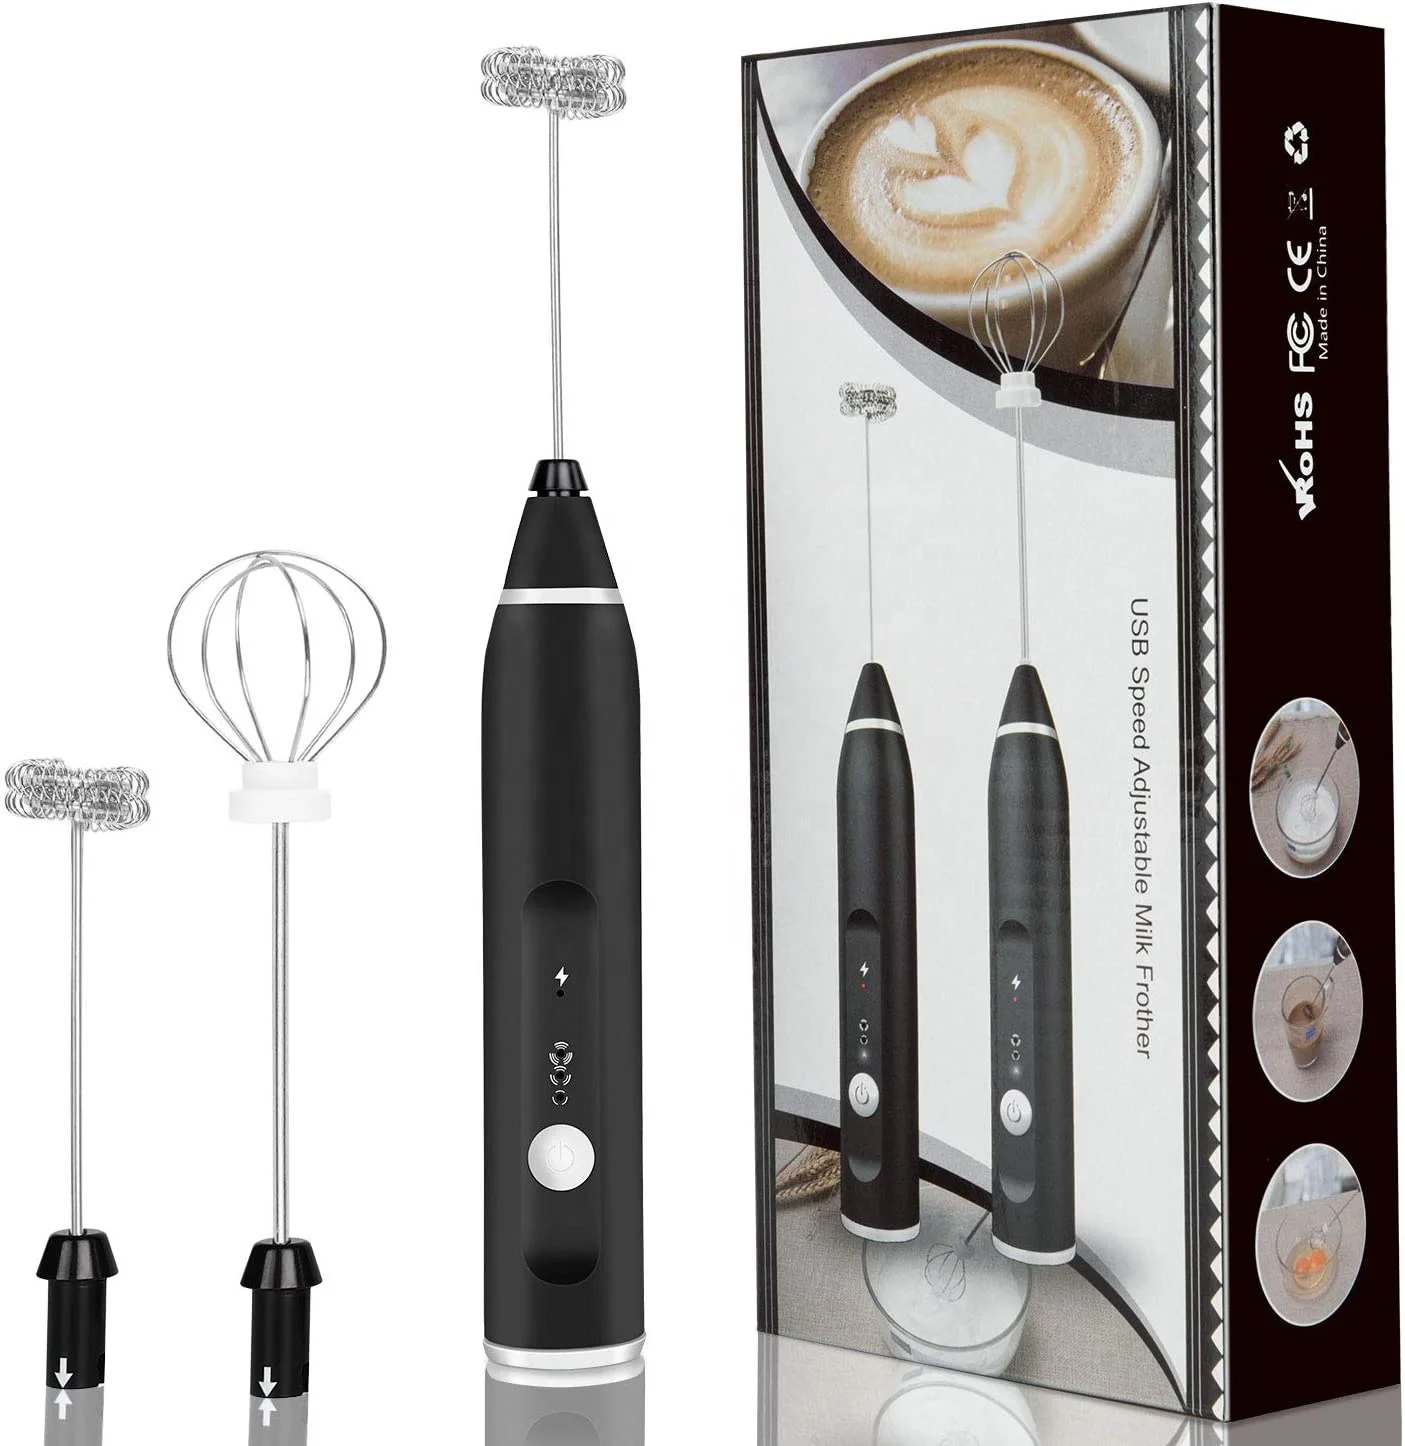 

USB Rechargeable Milk Frother Handheld Electric Foam Maker with 2 Stainless 3-Speed Adjustable Whisks, Perfect for Coffee Lattes, Black, white